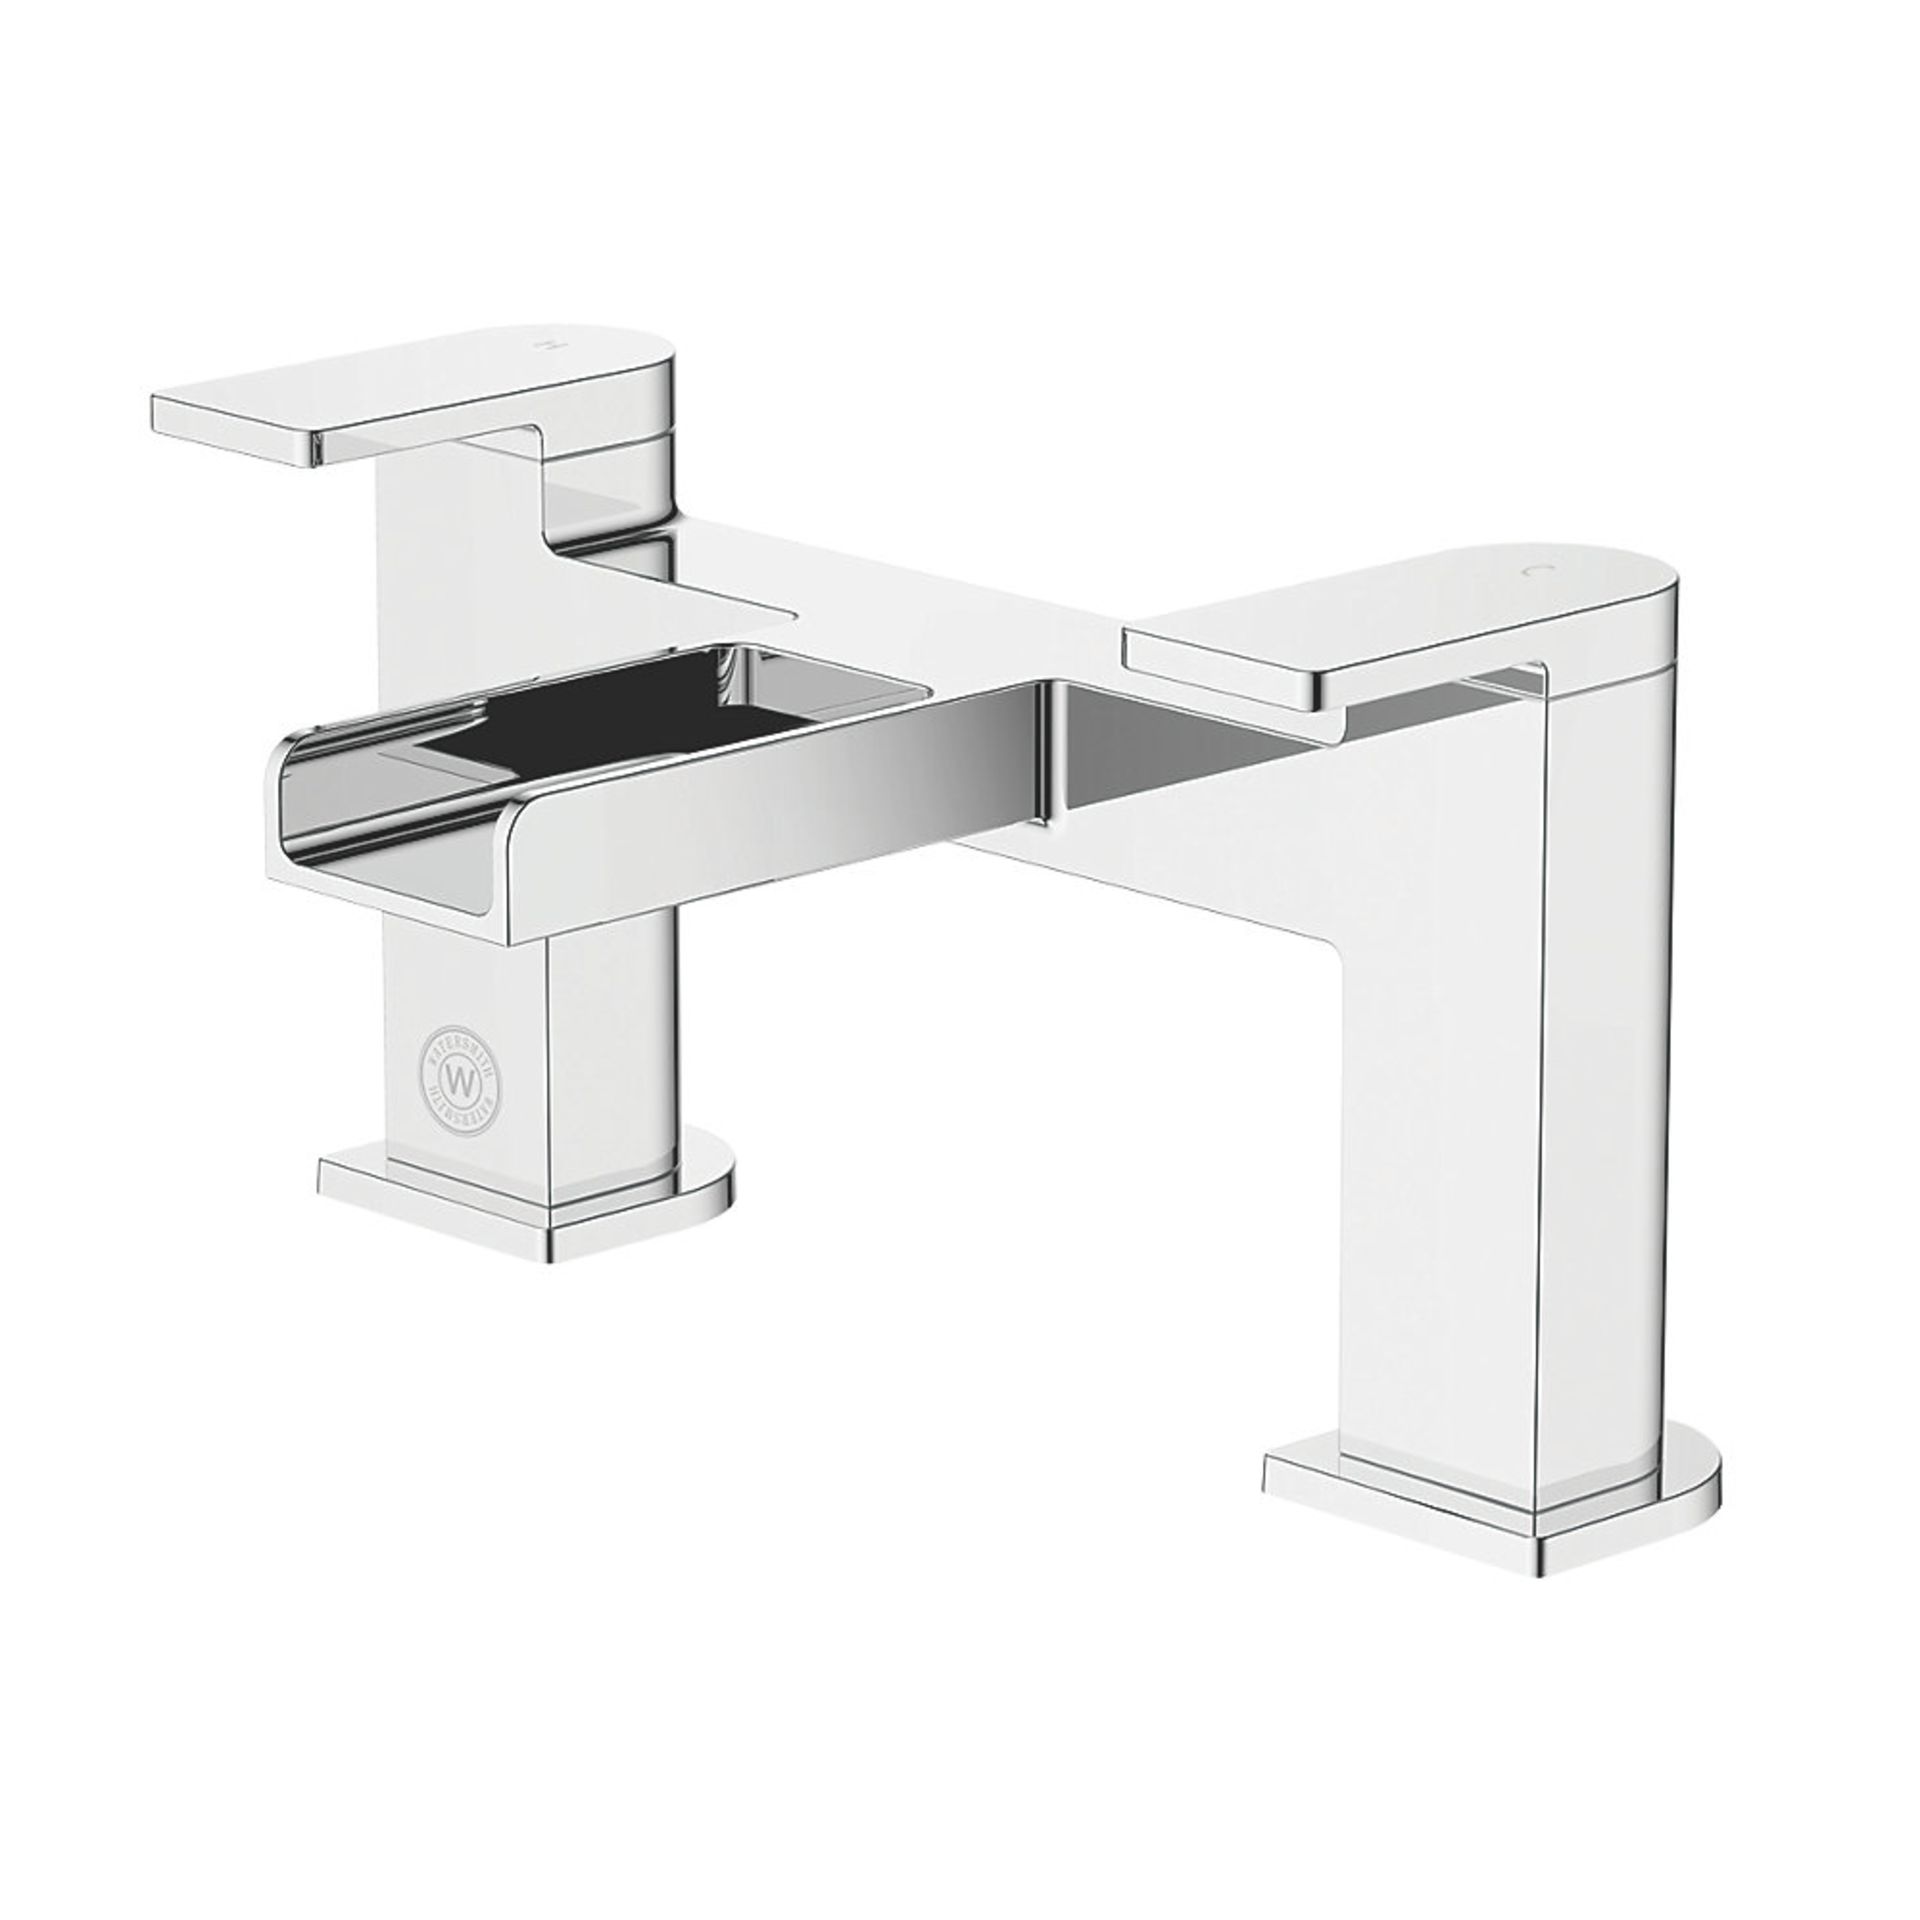 (MC148) Niagara Waterfall Bath Mono Mixer Tap. Double Lever Operation Suitable for High & Low - Image 3 of 3